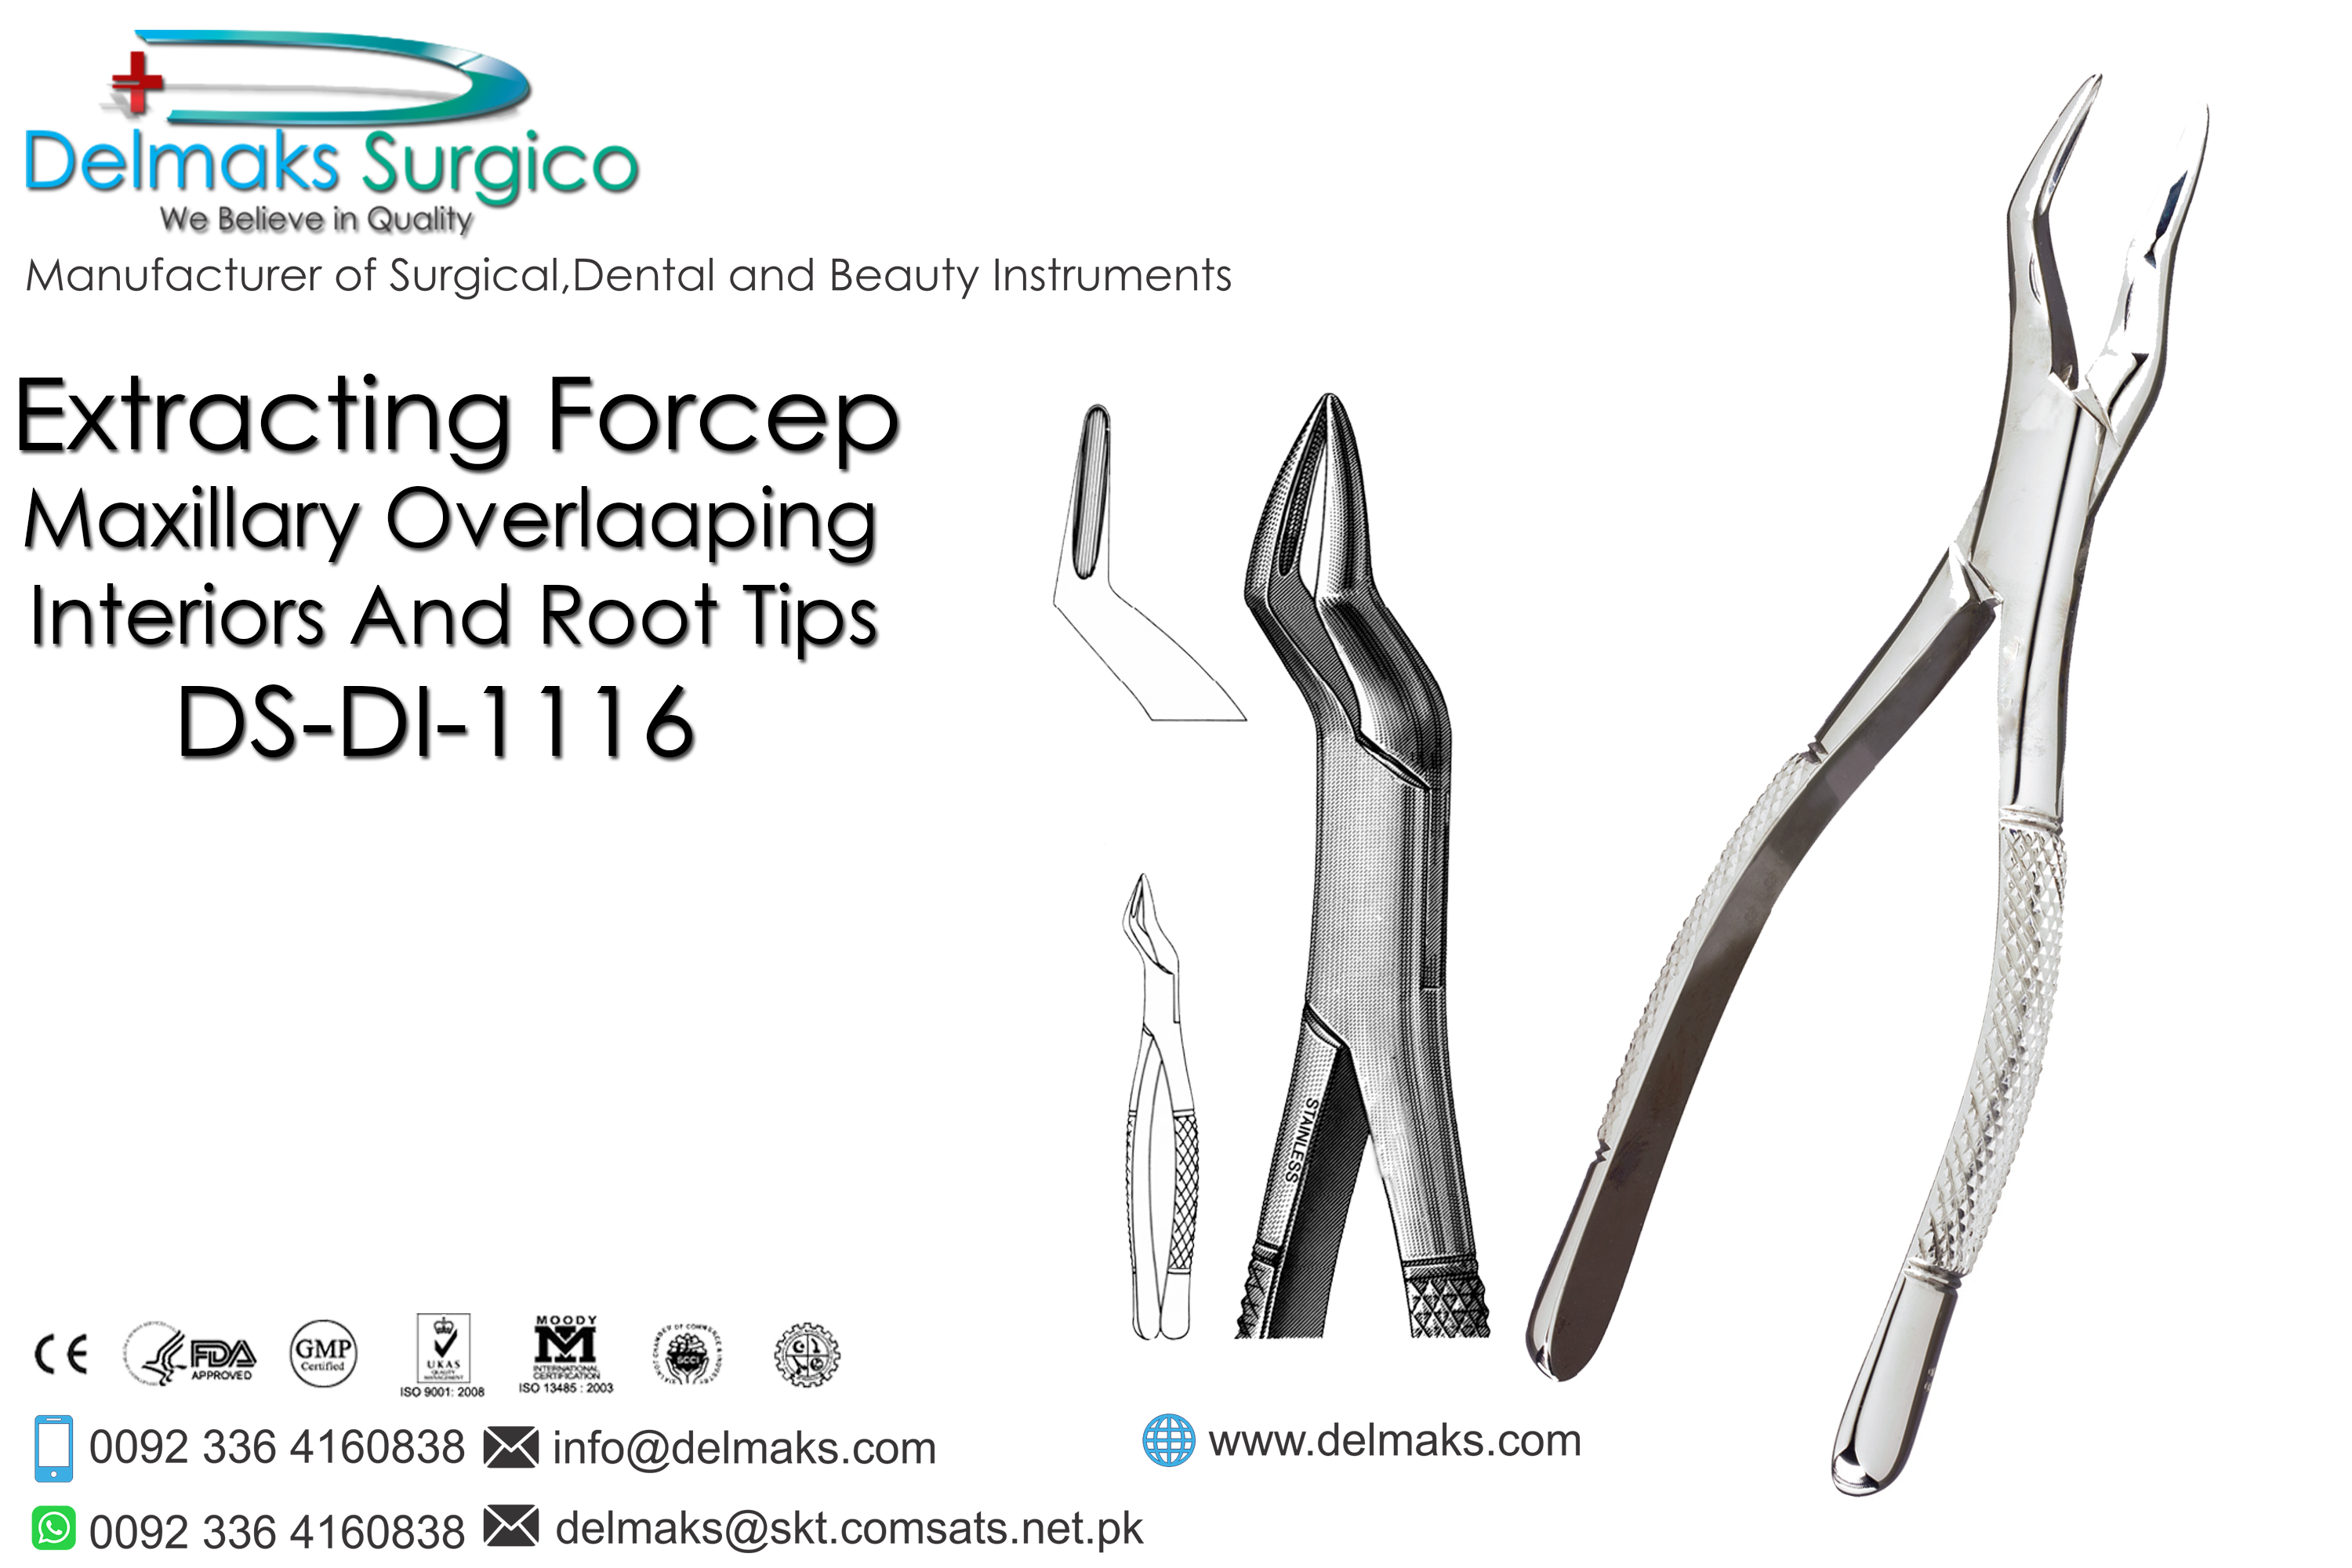 Extracting Forcep Mandibular First and Second Molars-Oral and Maxillofacial Surgery Instruments-Dental Instruments-Delmaks Surgico 